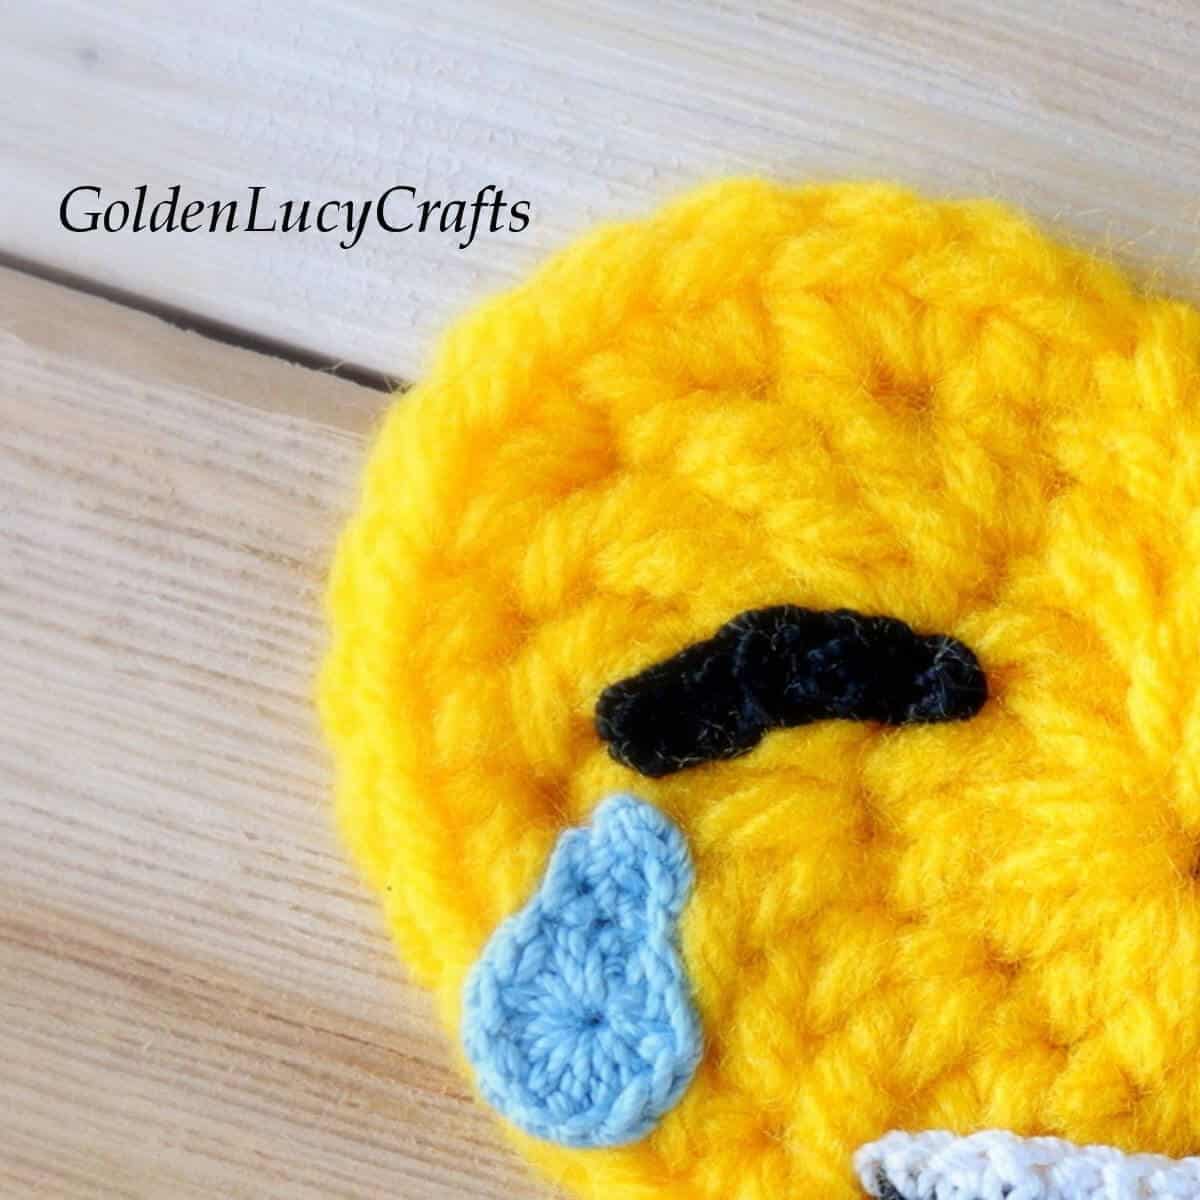 Crochet emoji close up picture - eye and tear.